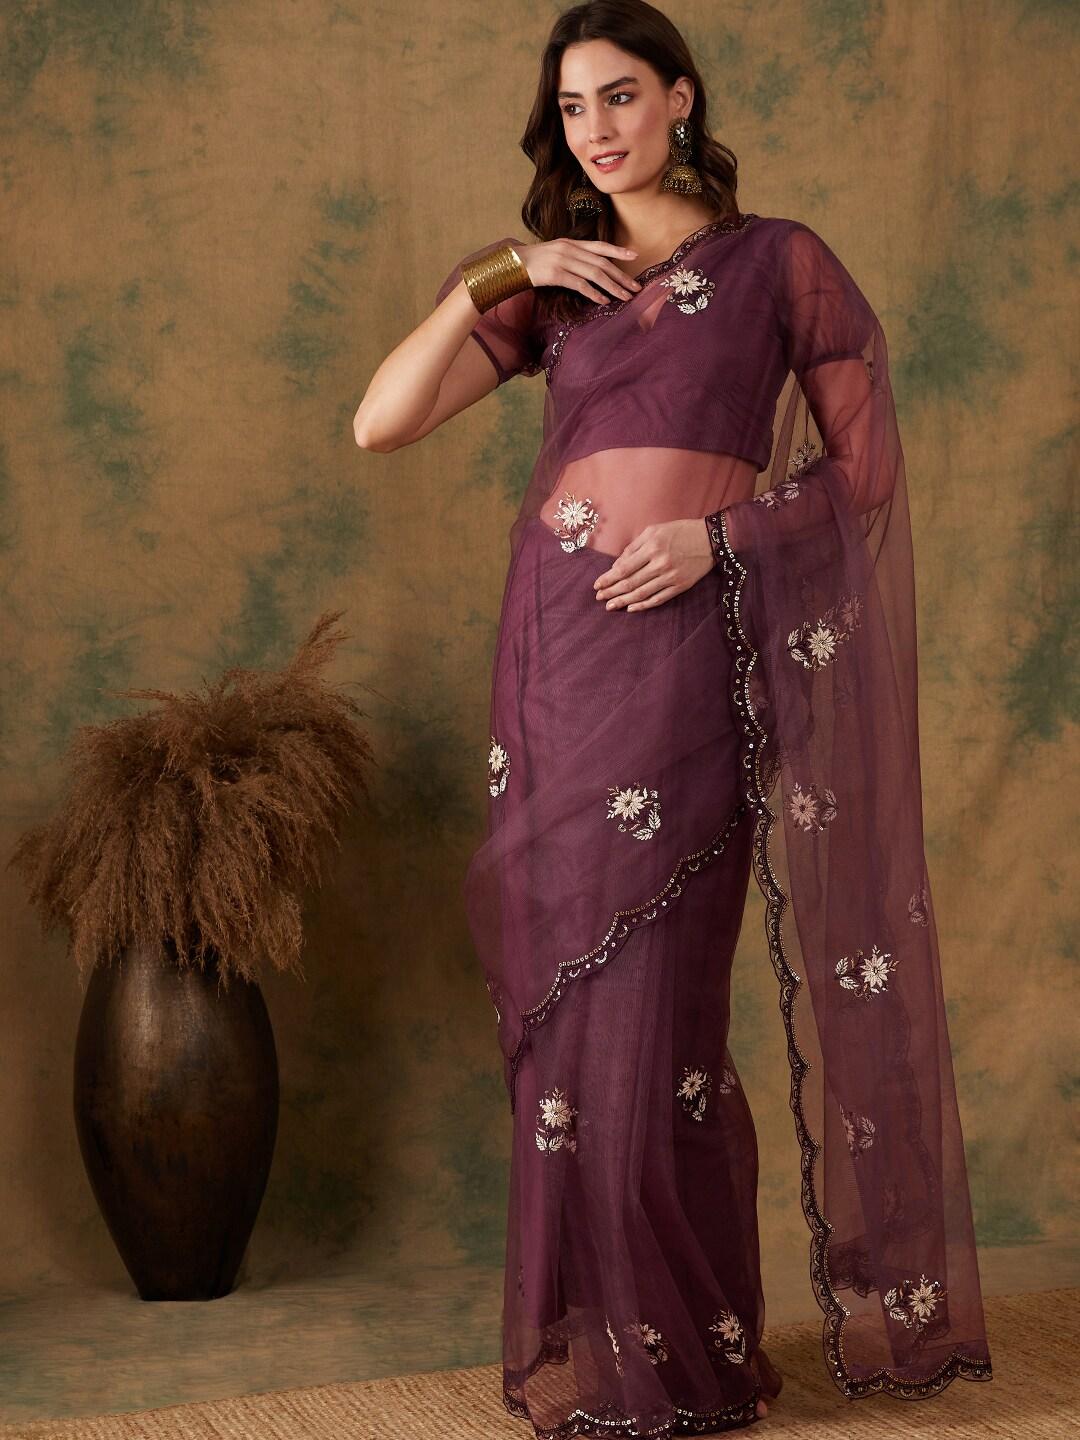 sangria purple floral embroidered beads and stones embellished net saree